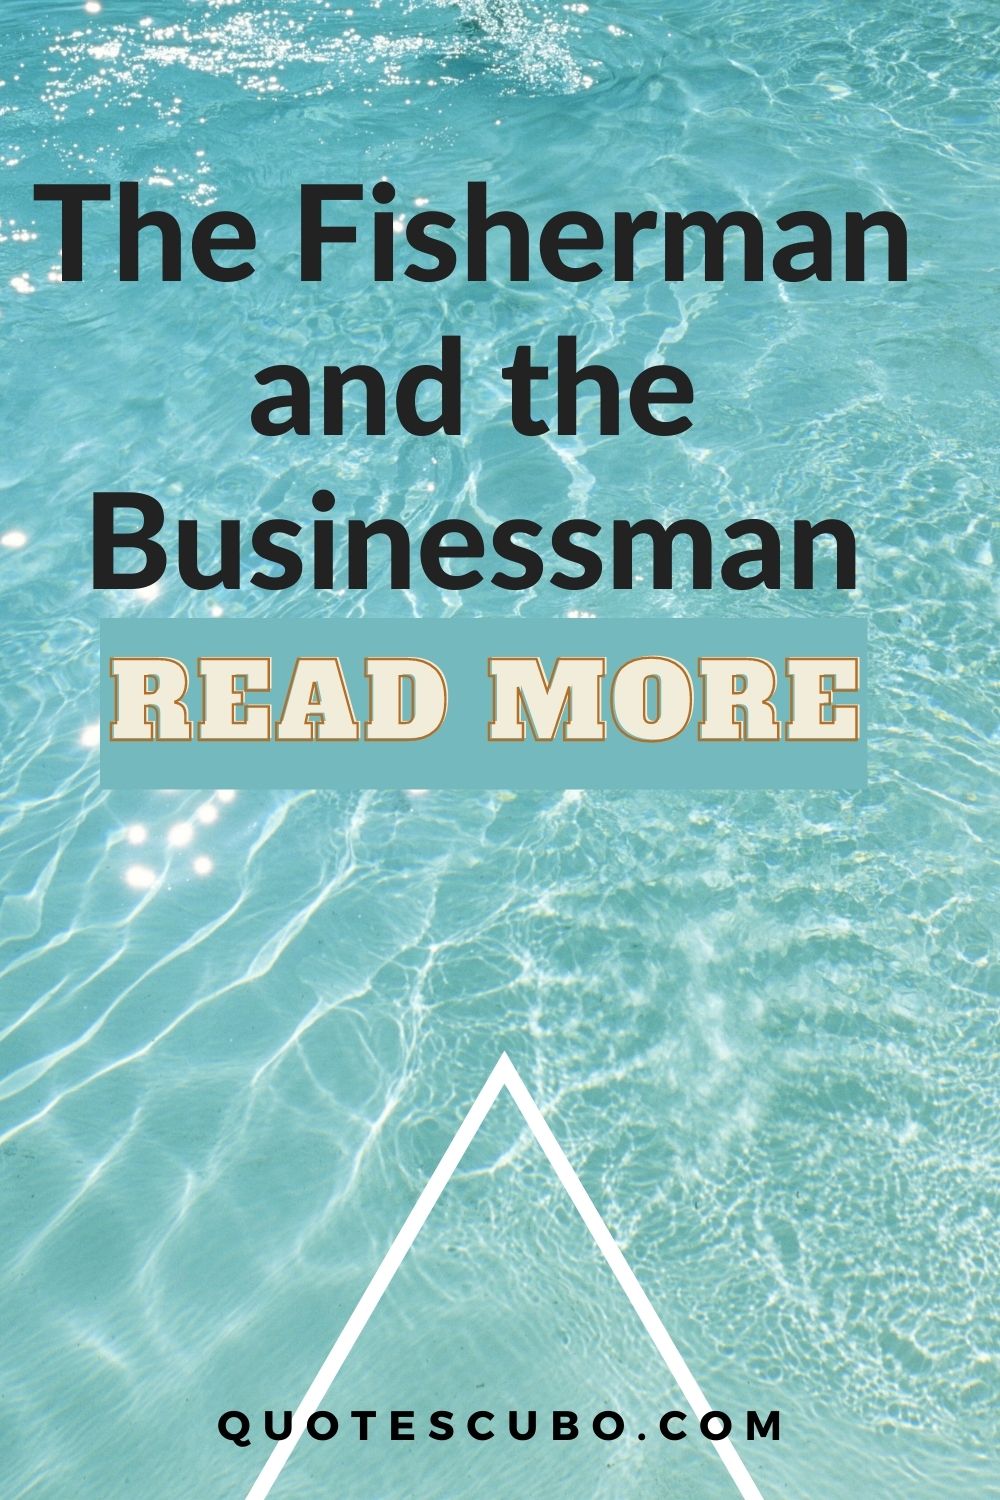 The Fisherman and the Businessman - a classic Brazilian story. - Funny ...